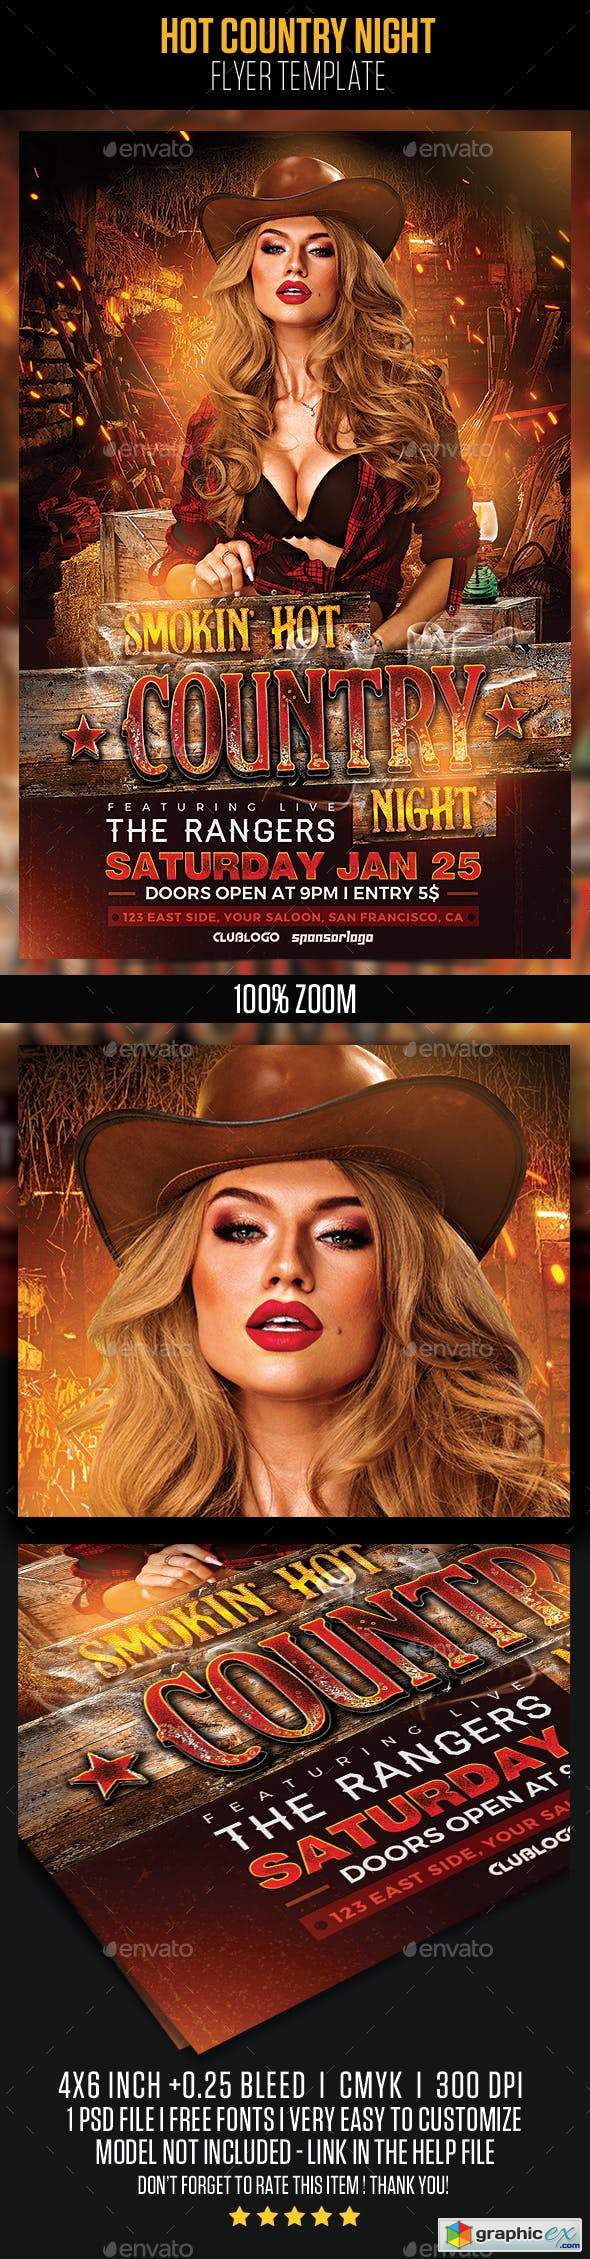 Hot Country Night Flyer Template